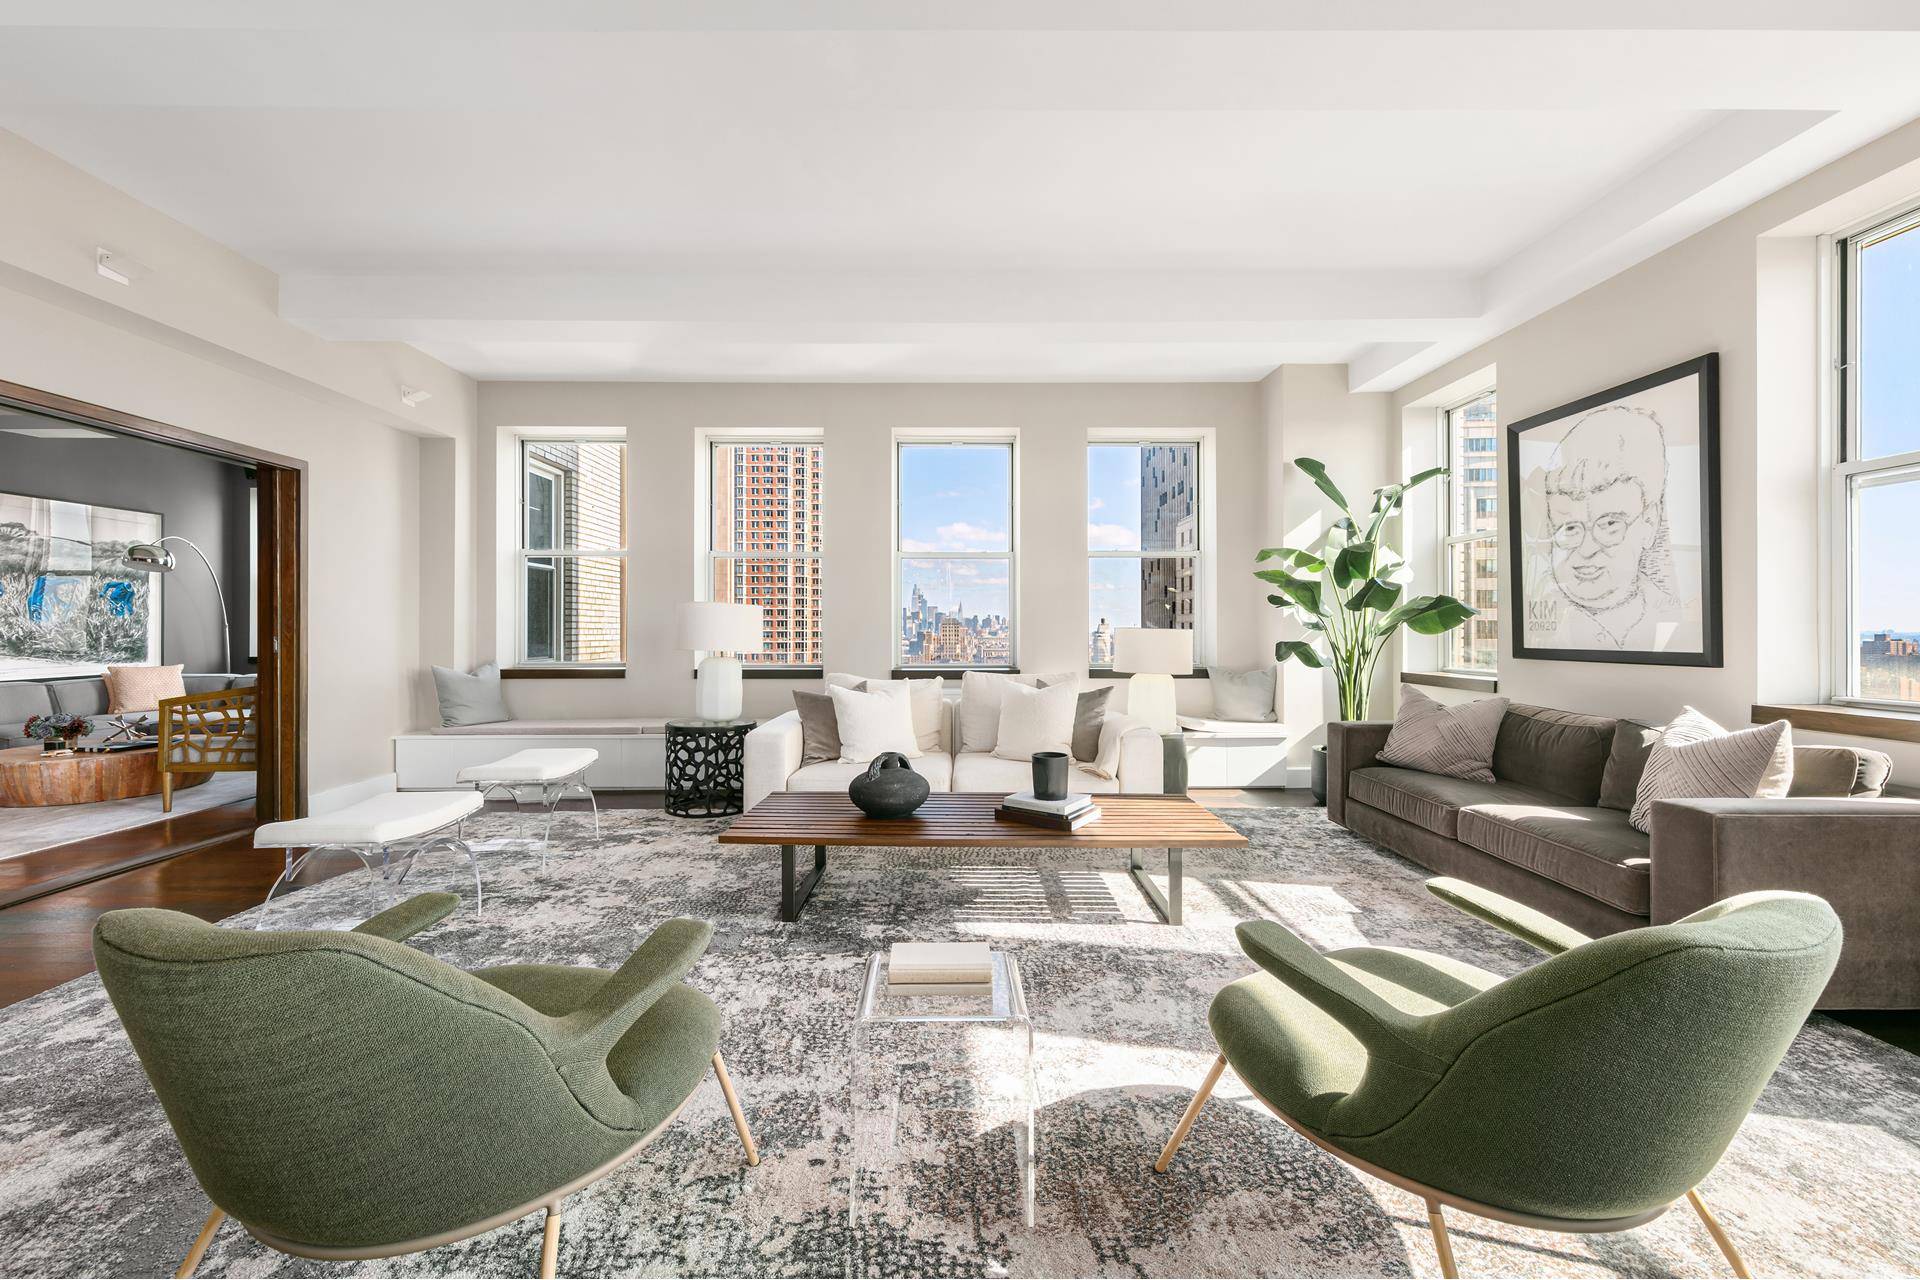 Drenched in natural light throughout the day through its 35 windows facing south, north, and east, this splendid TriBeCa loft showcases a collection of New York City's most iconic landmarks.